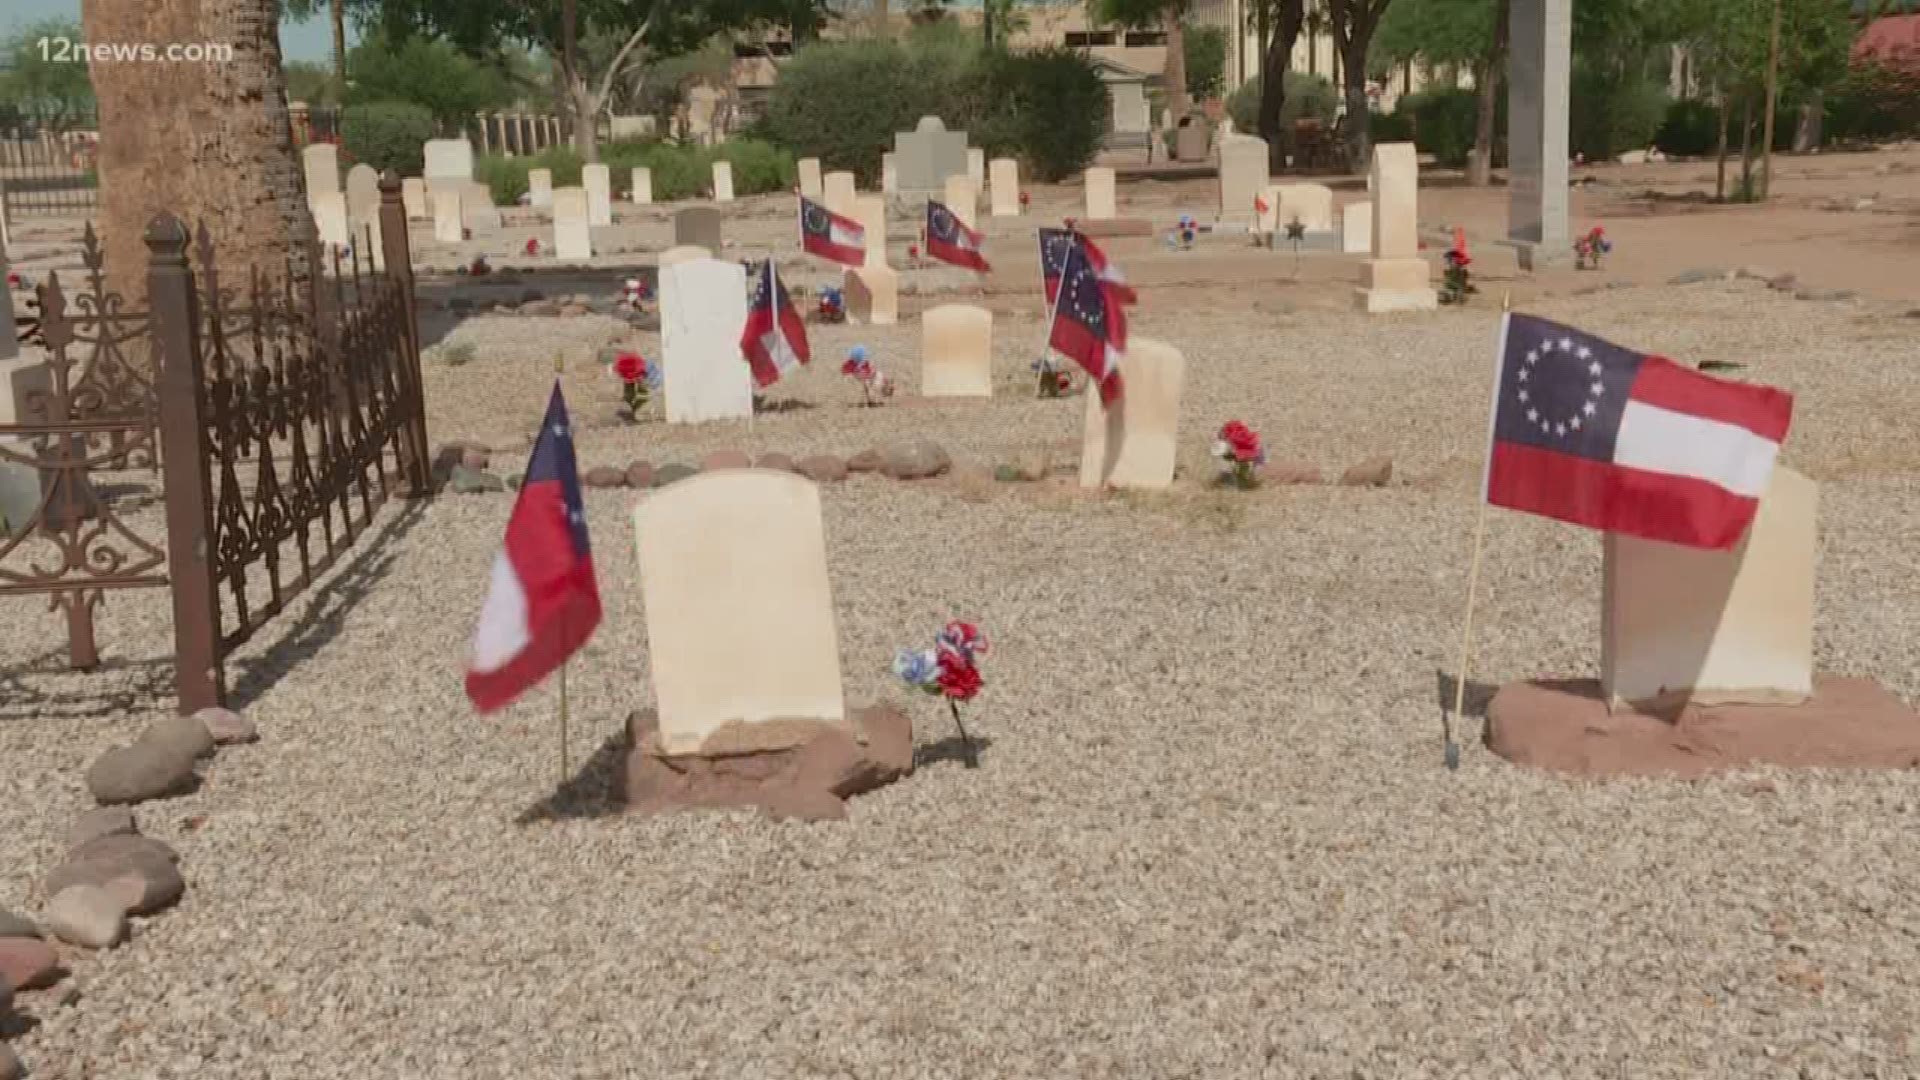 The 35th annual Pioneer Cemetery Memorial Day Remembrance Ceremony is taking place at 9 a.m. in Phoenix.